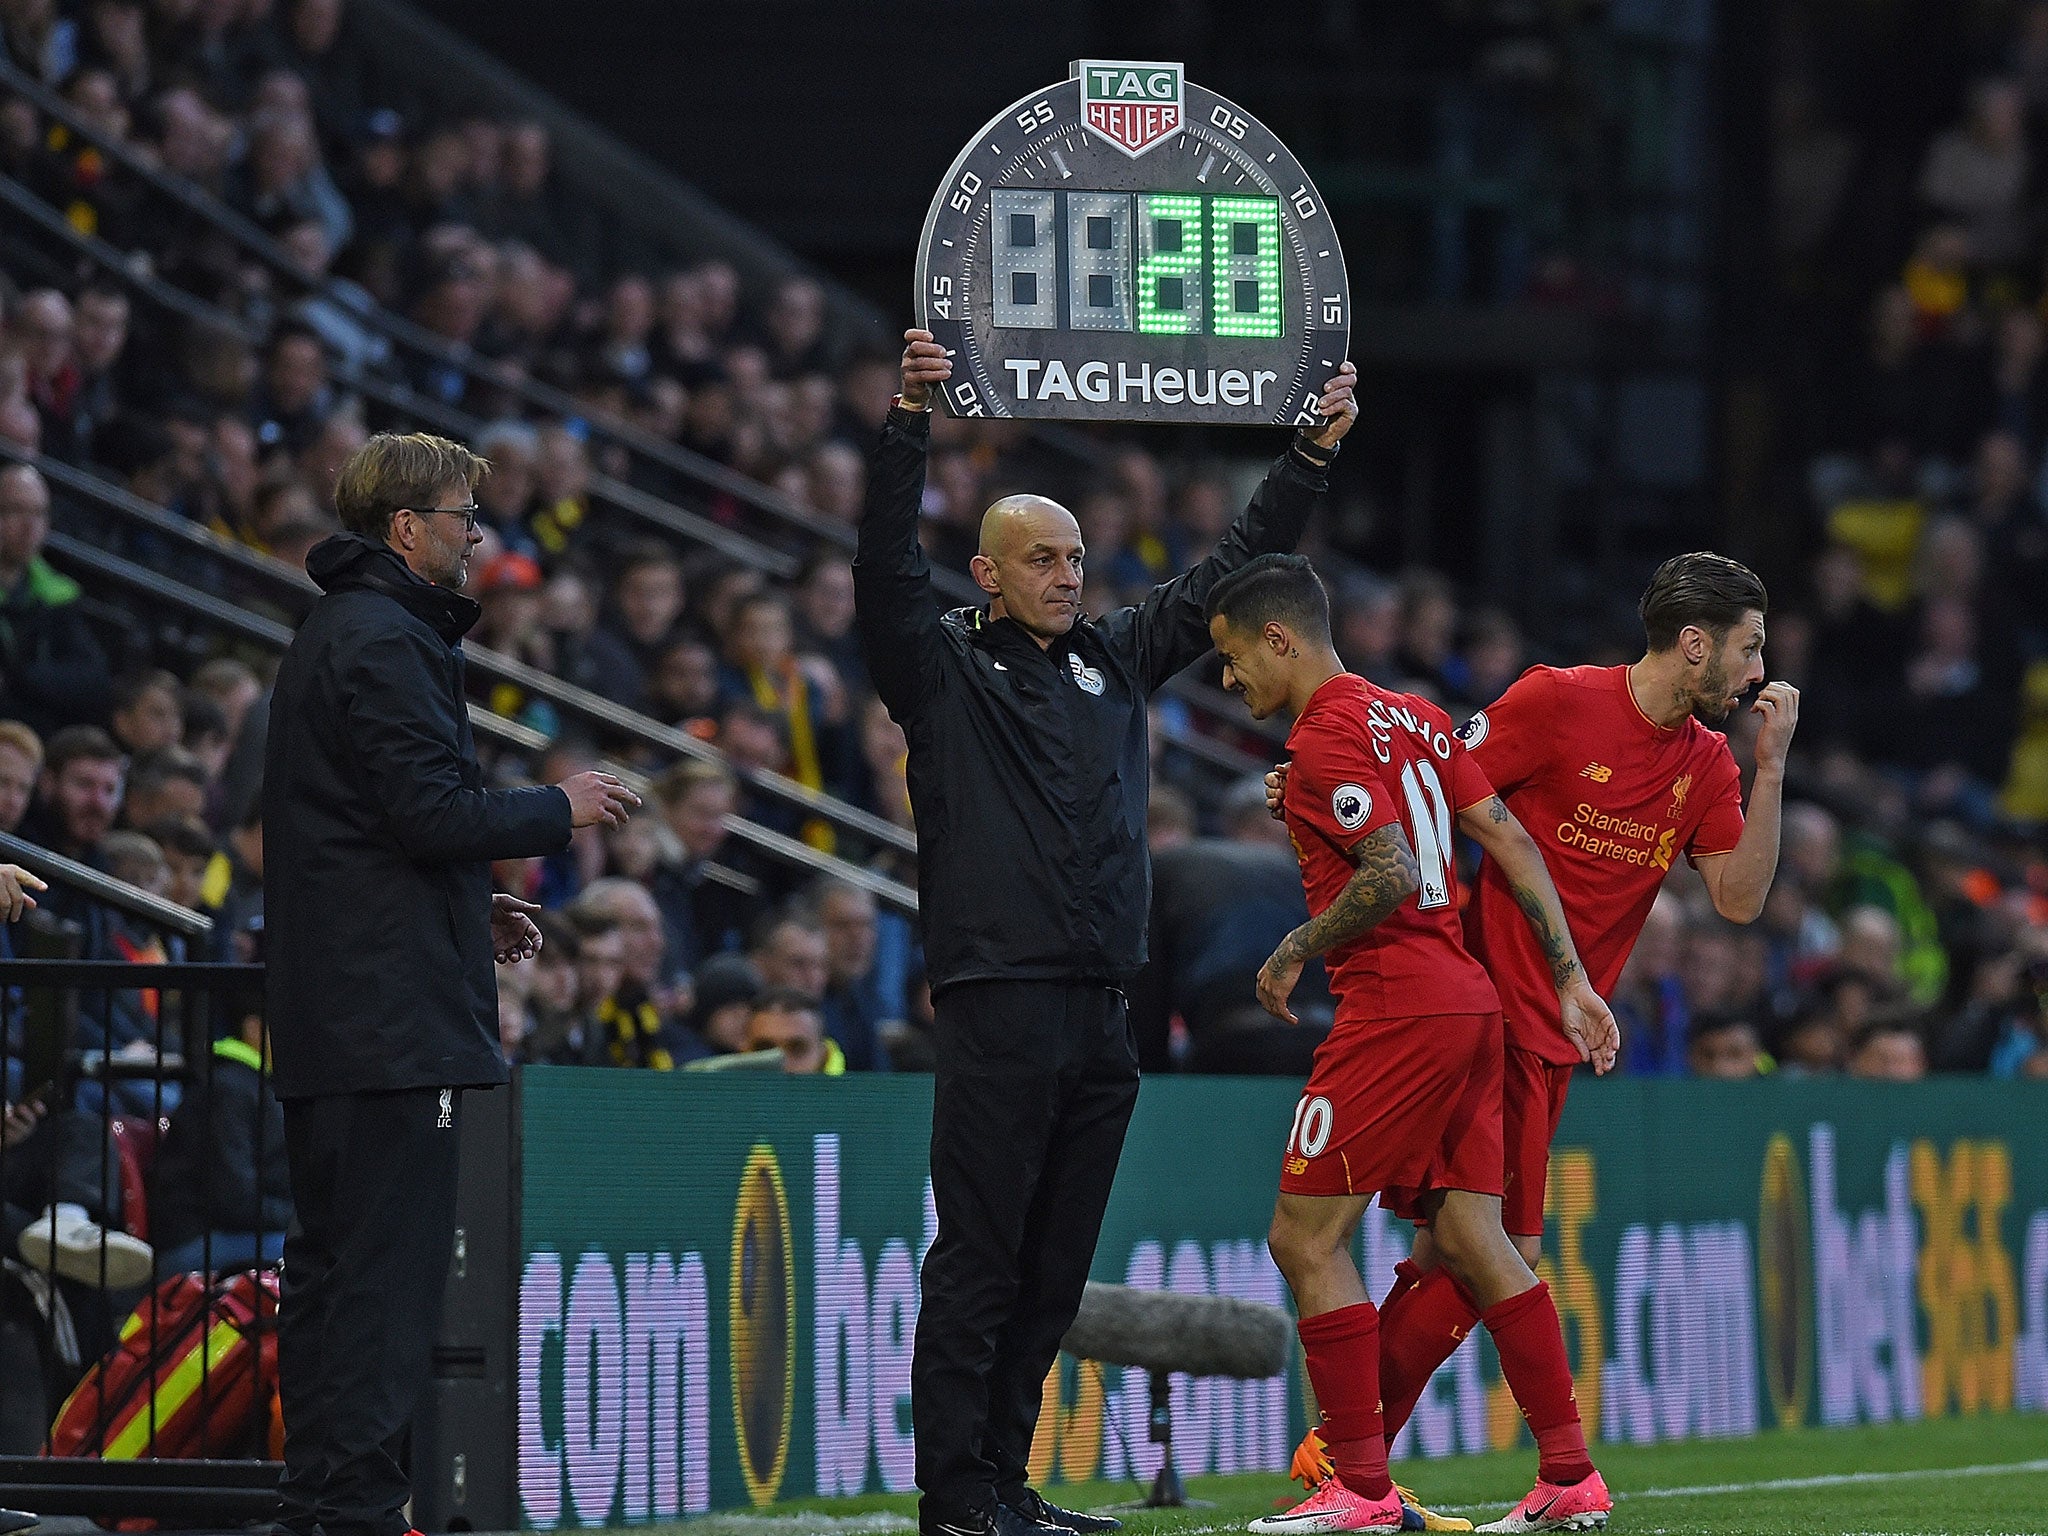 Philippe Coutinho was unable to play on against Watford on Monday night